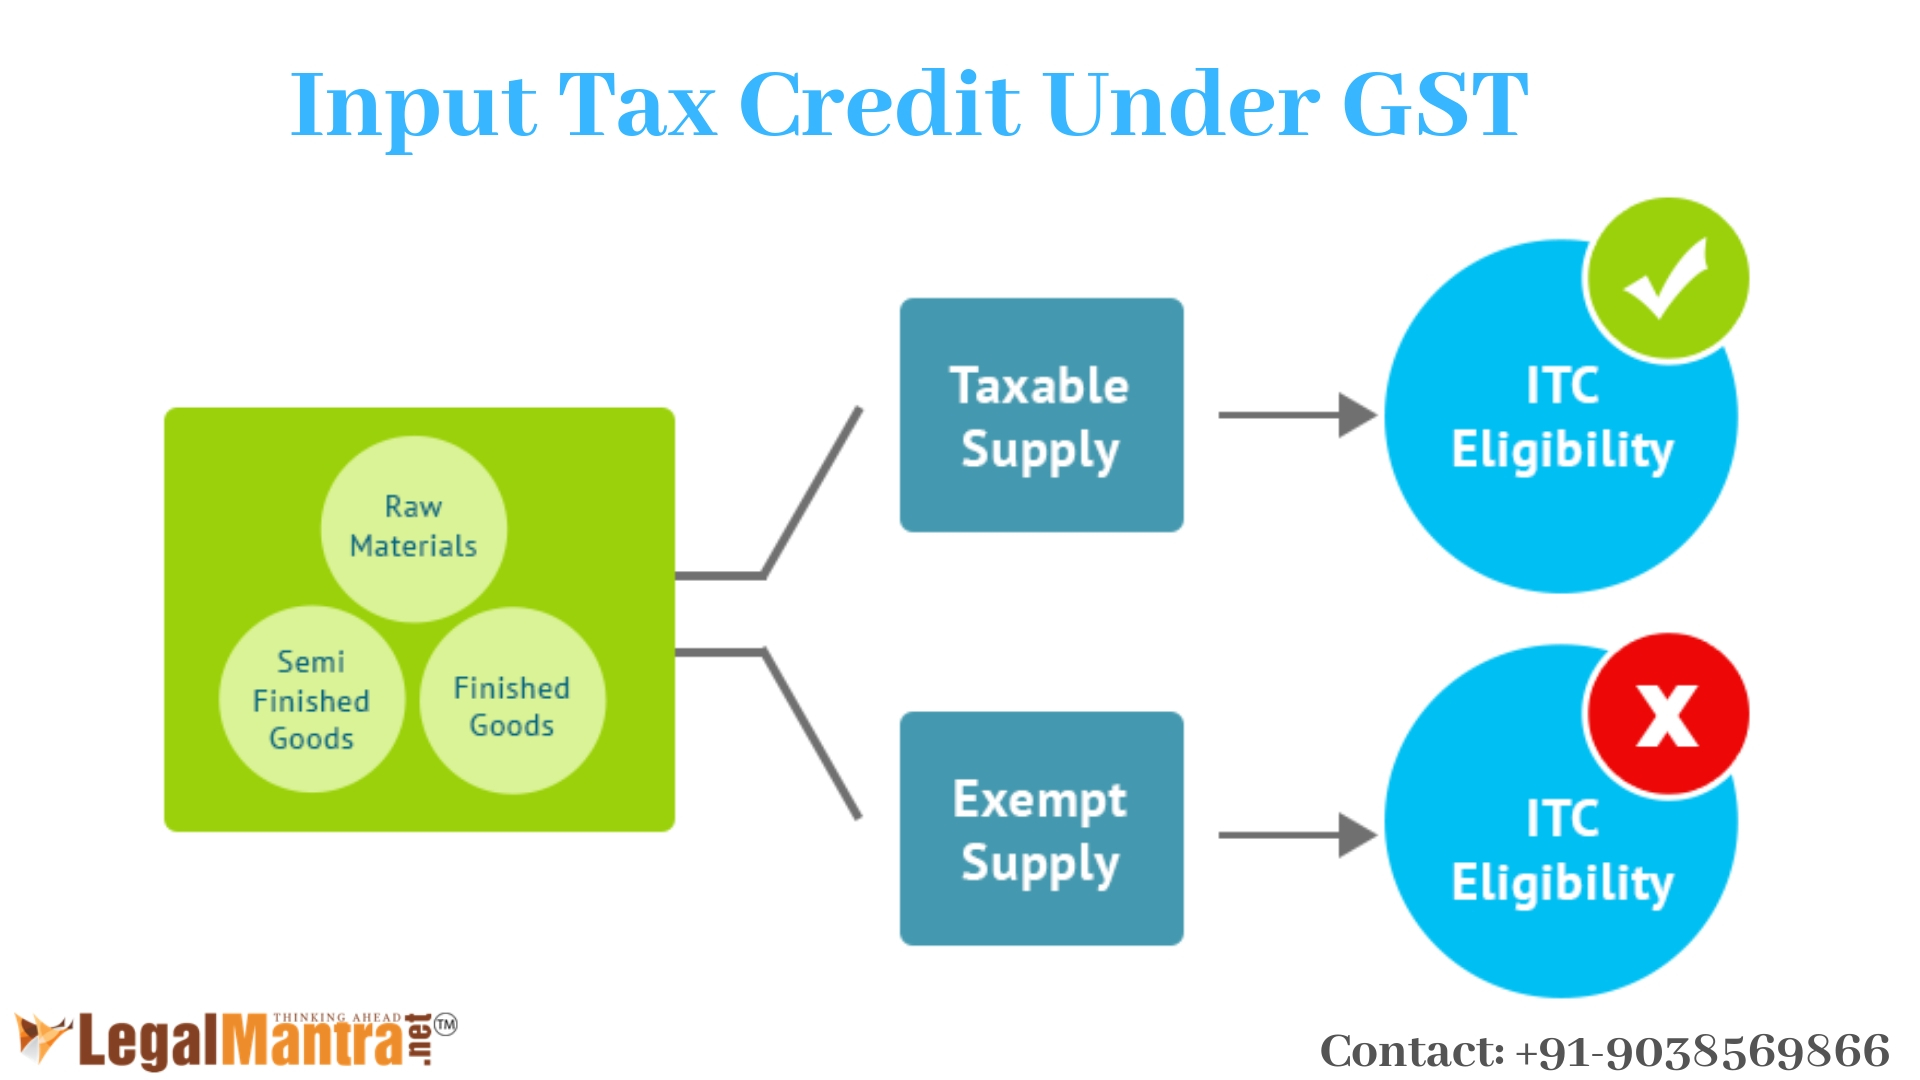 An Interesting Issue in GST: Availability of Input Tax Credit (ITC) on capital goods and input services if used for supply of both taxable and exempted goods